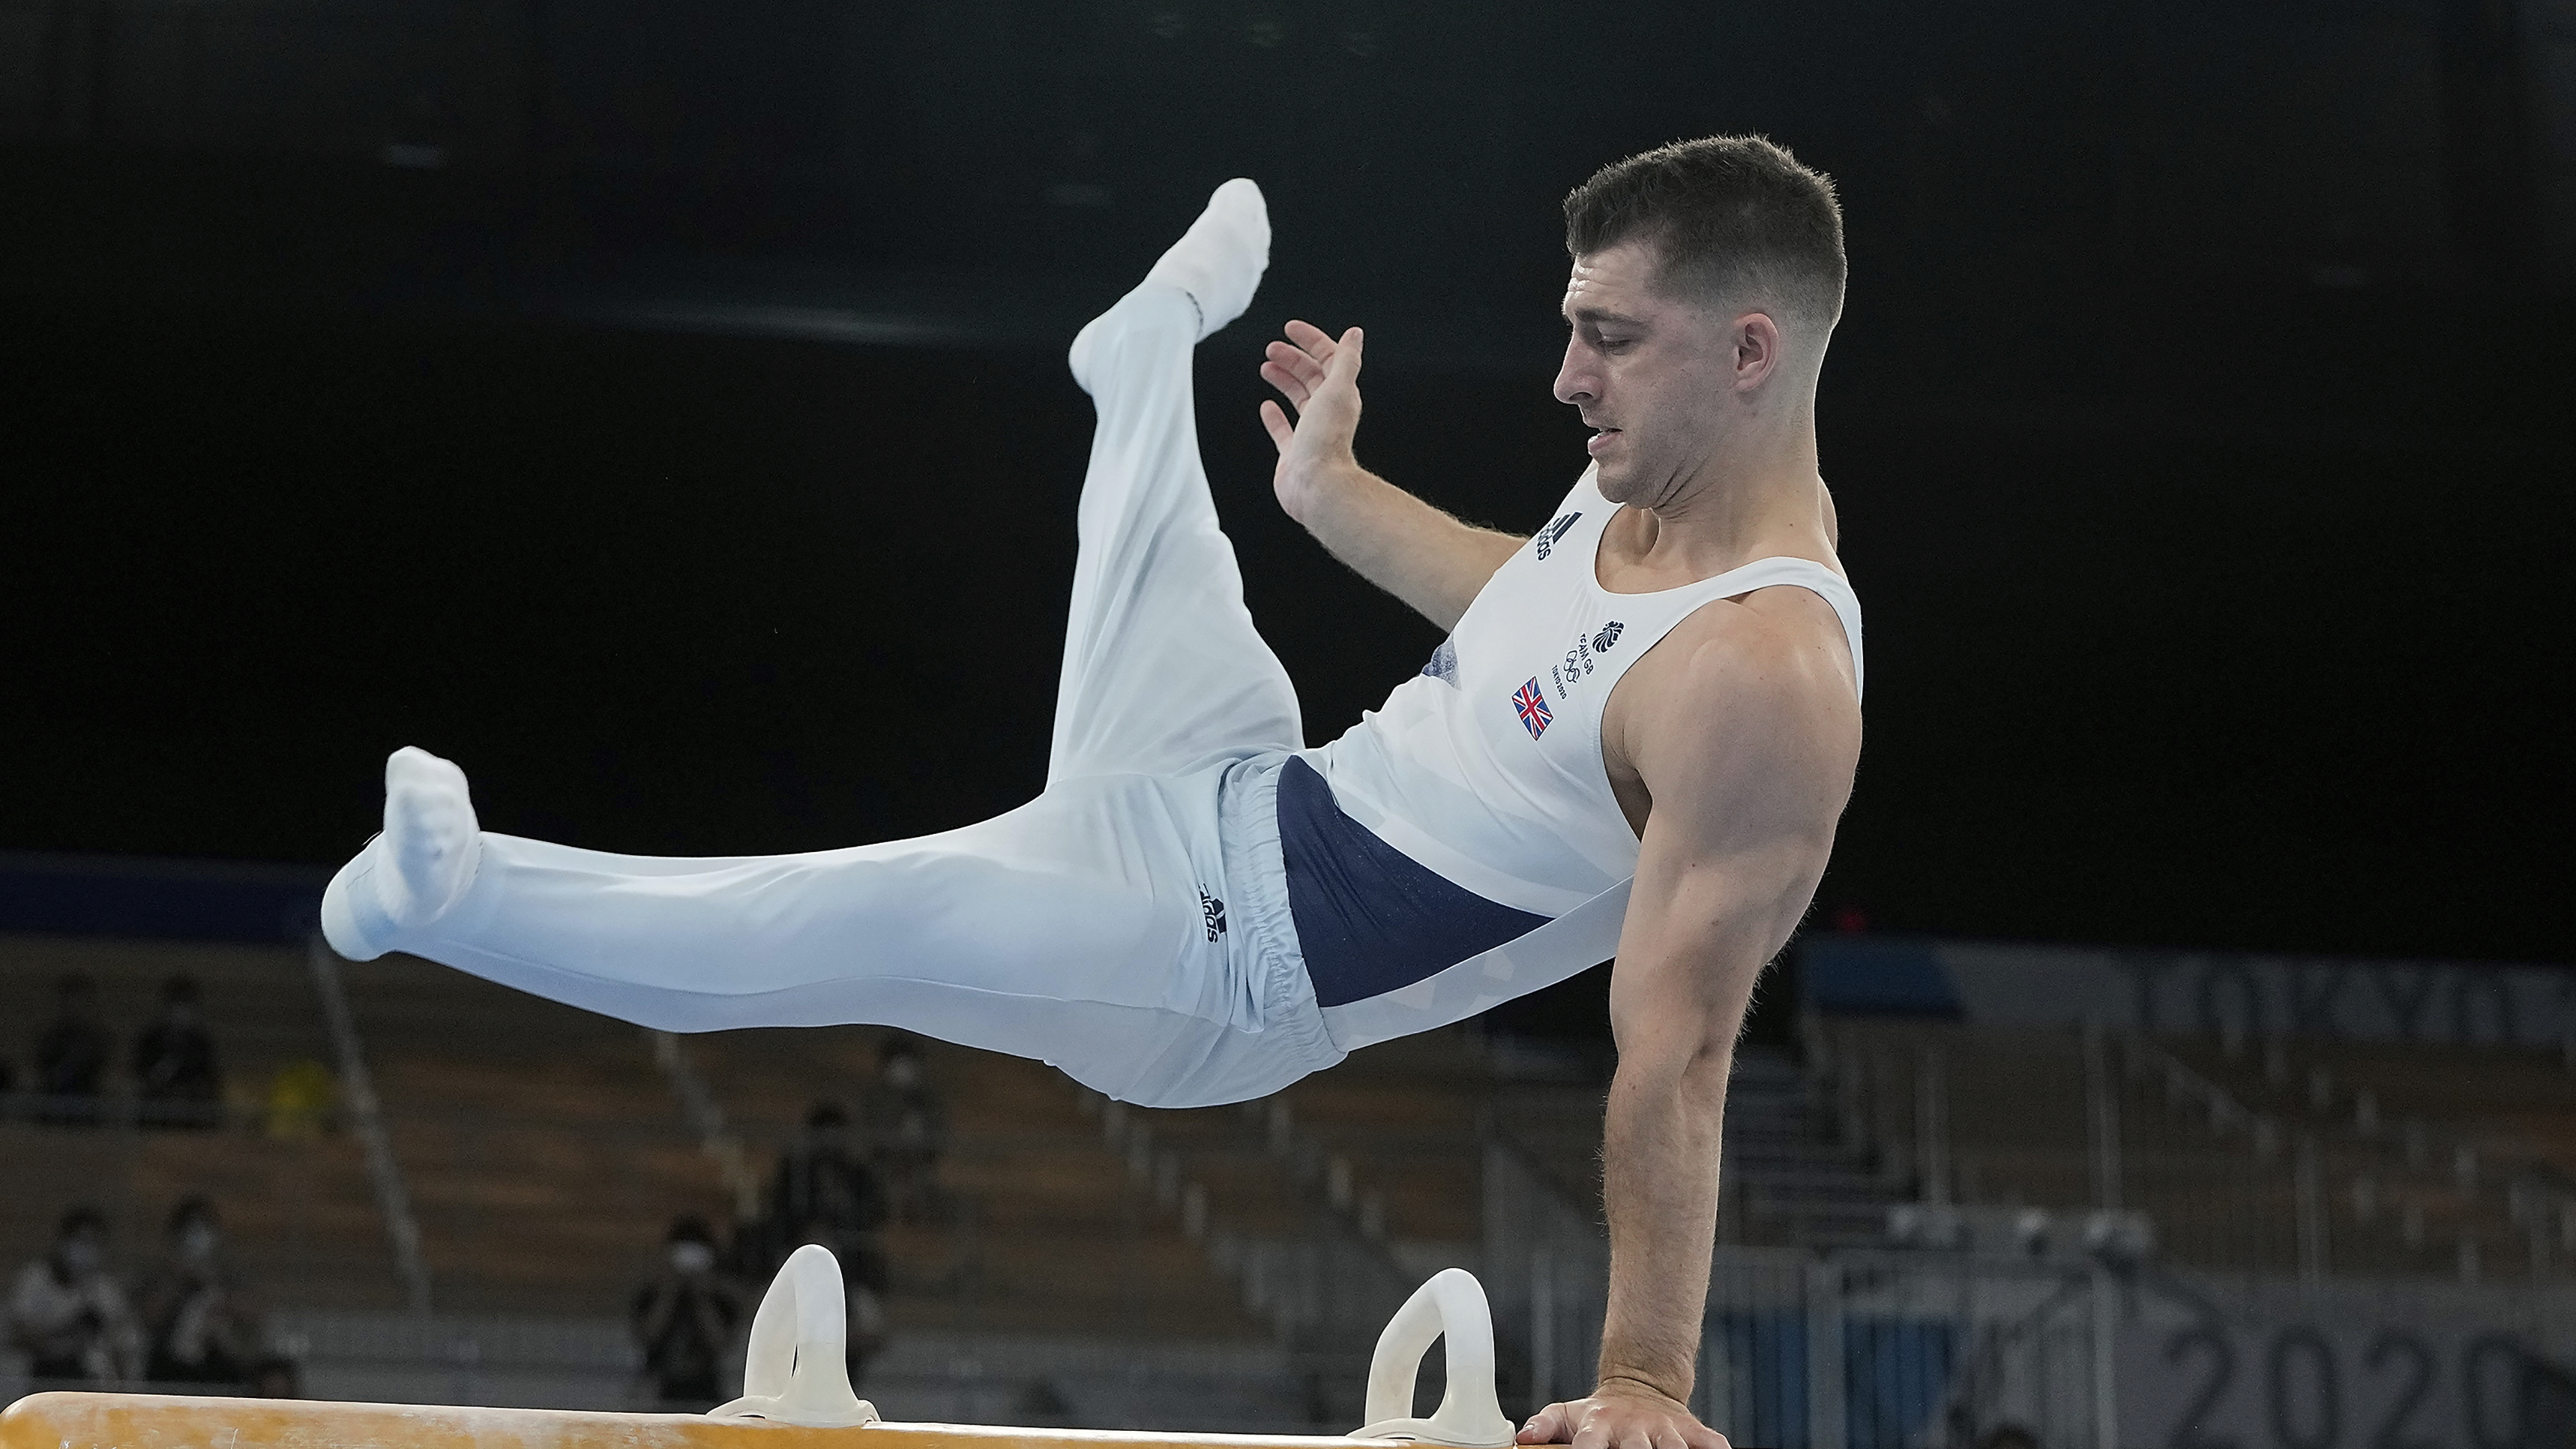 Olympic Men S Gymnastics 21 Pommel Horse Medal Winners Scores And Results Bleacher Report Latest News Videos And Highlights